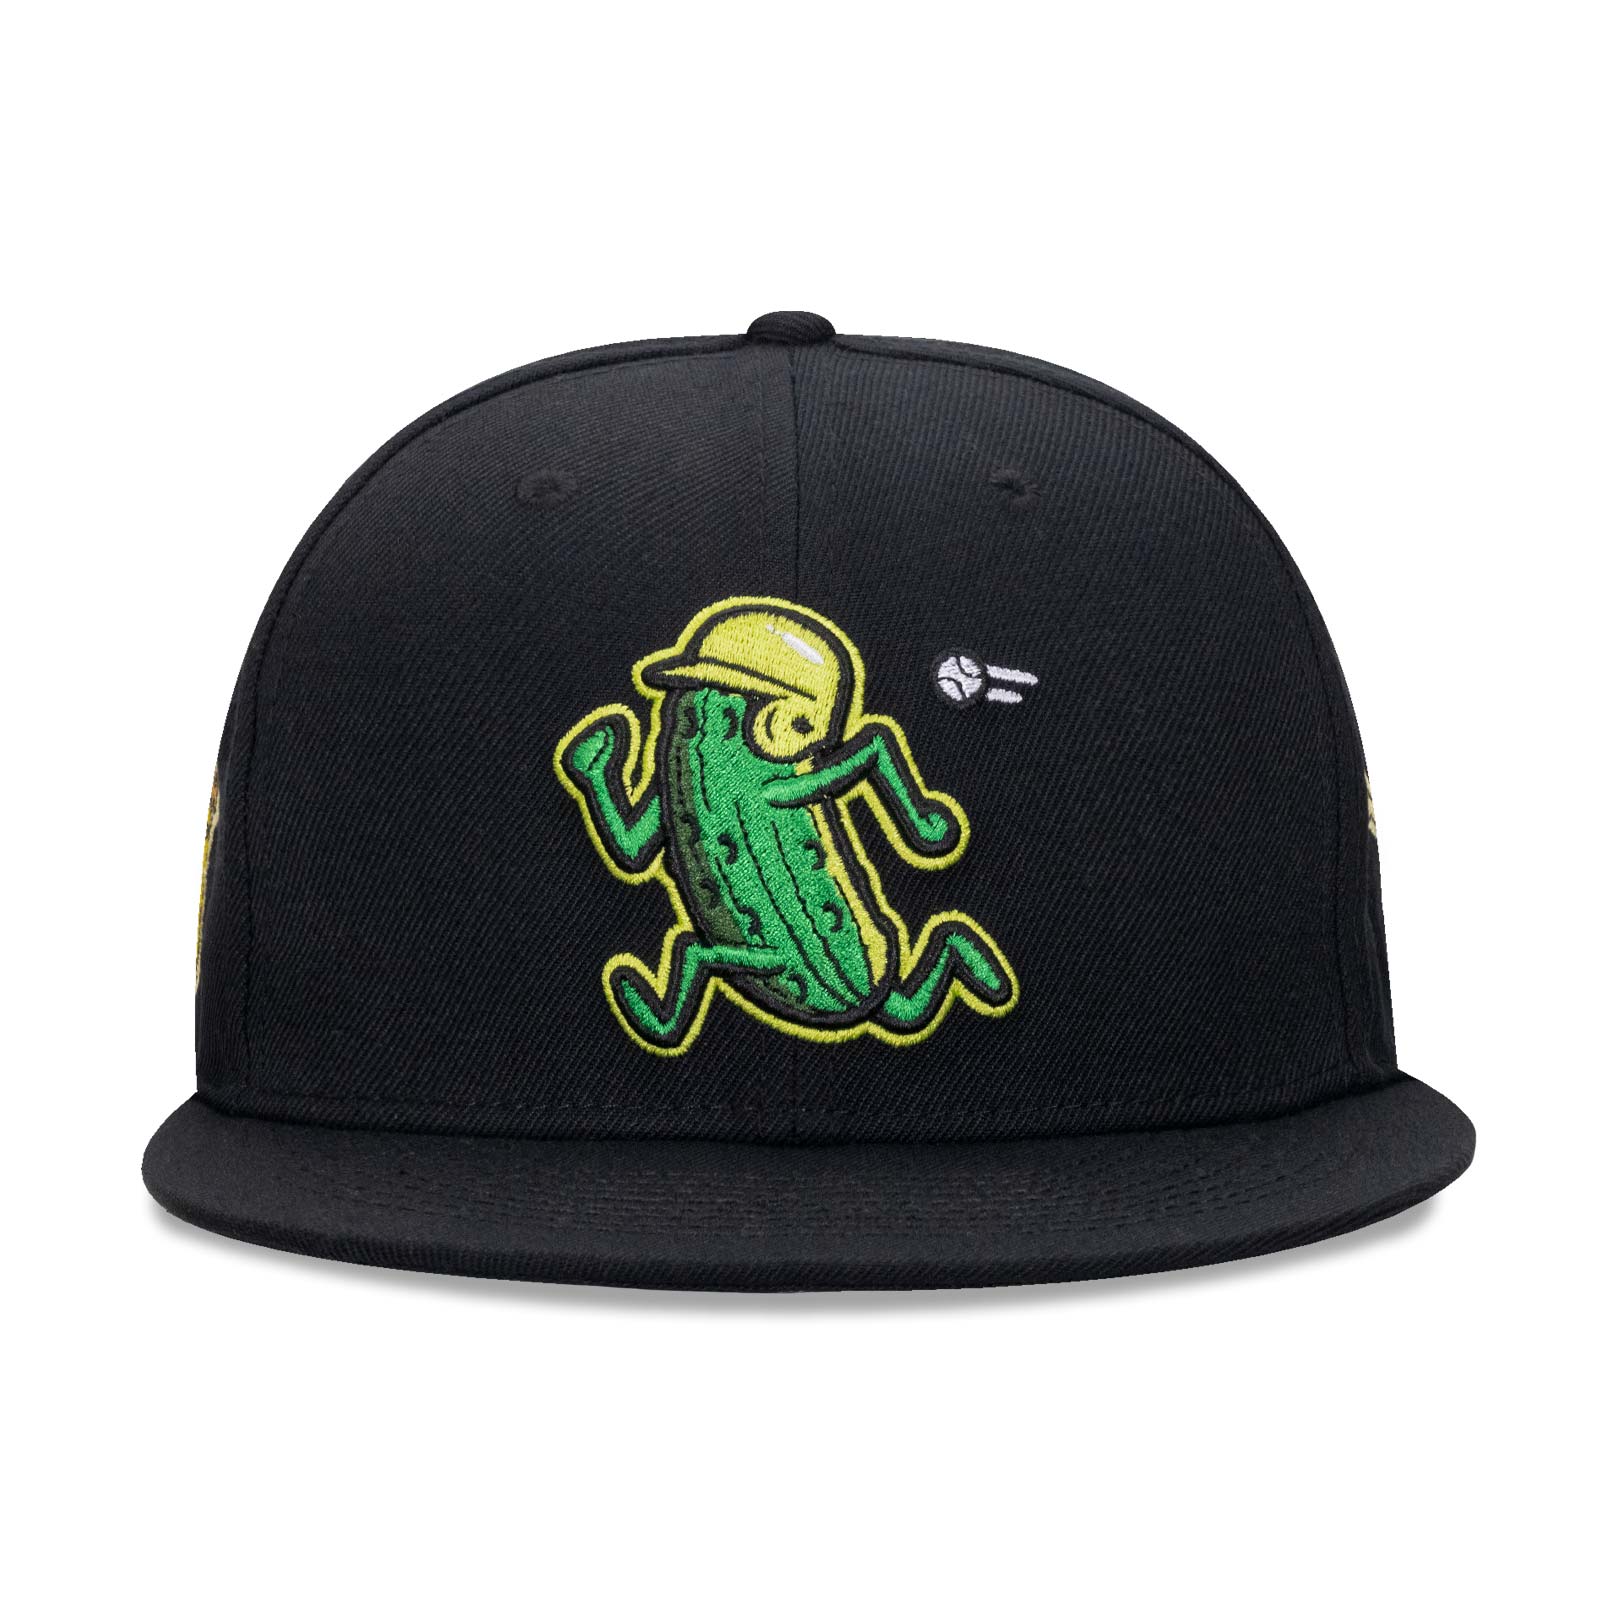 The Pickle Guys x New Era hat